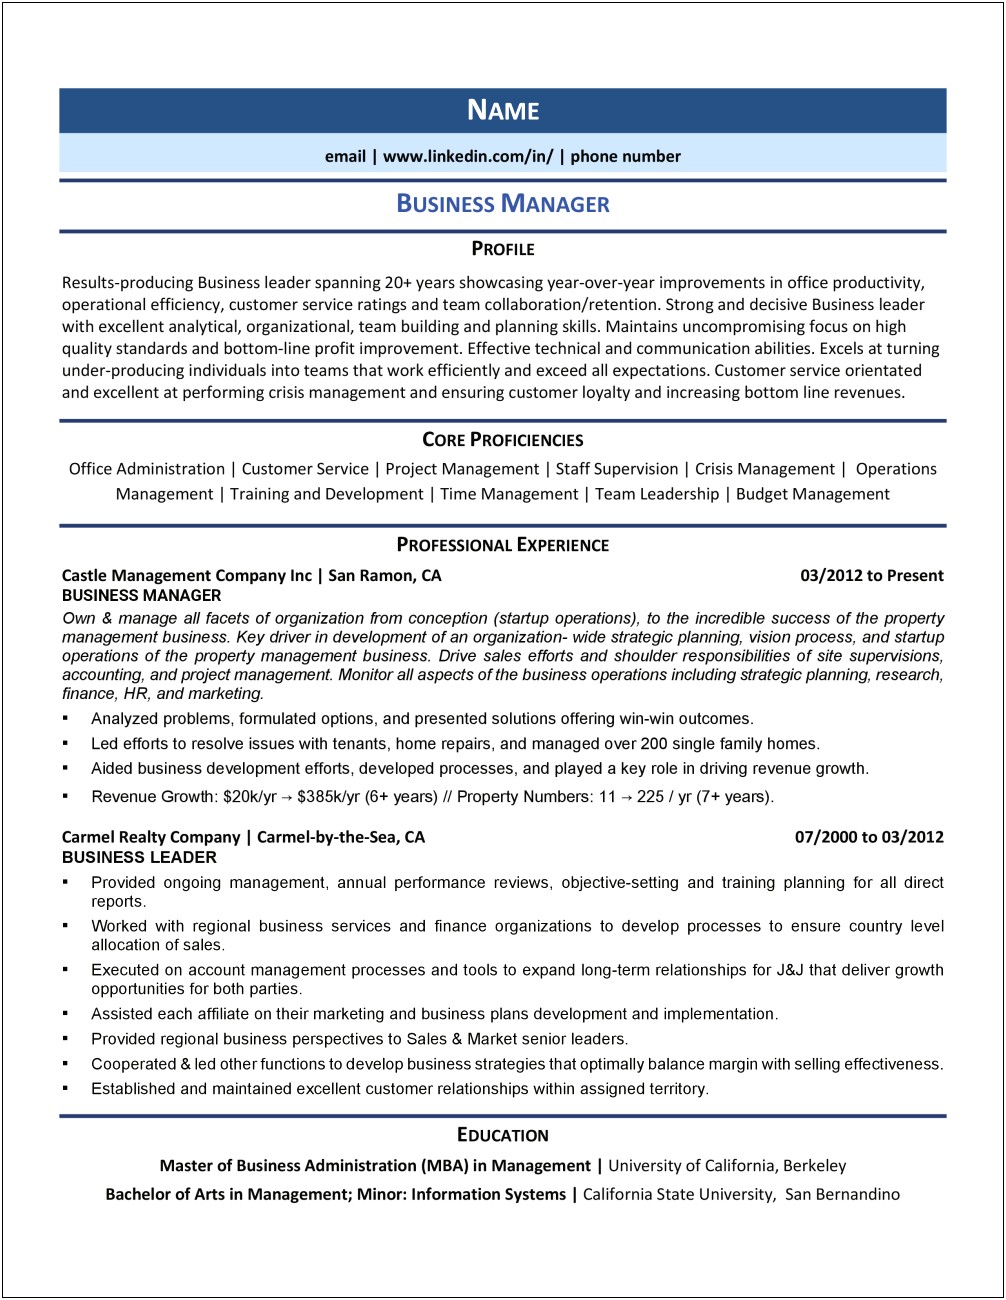 Bachelor Of Arts In Business Management Resume